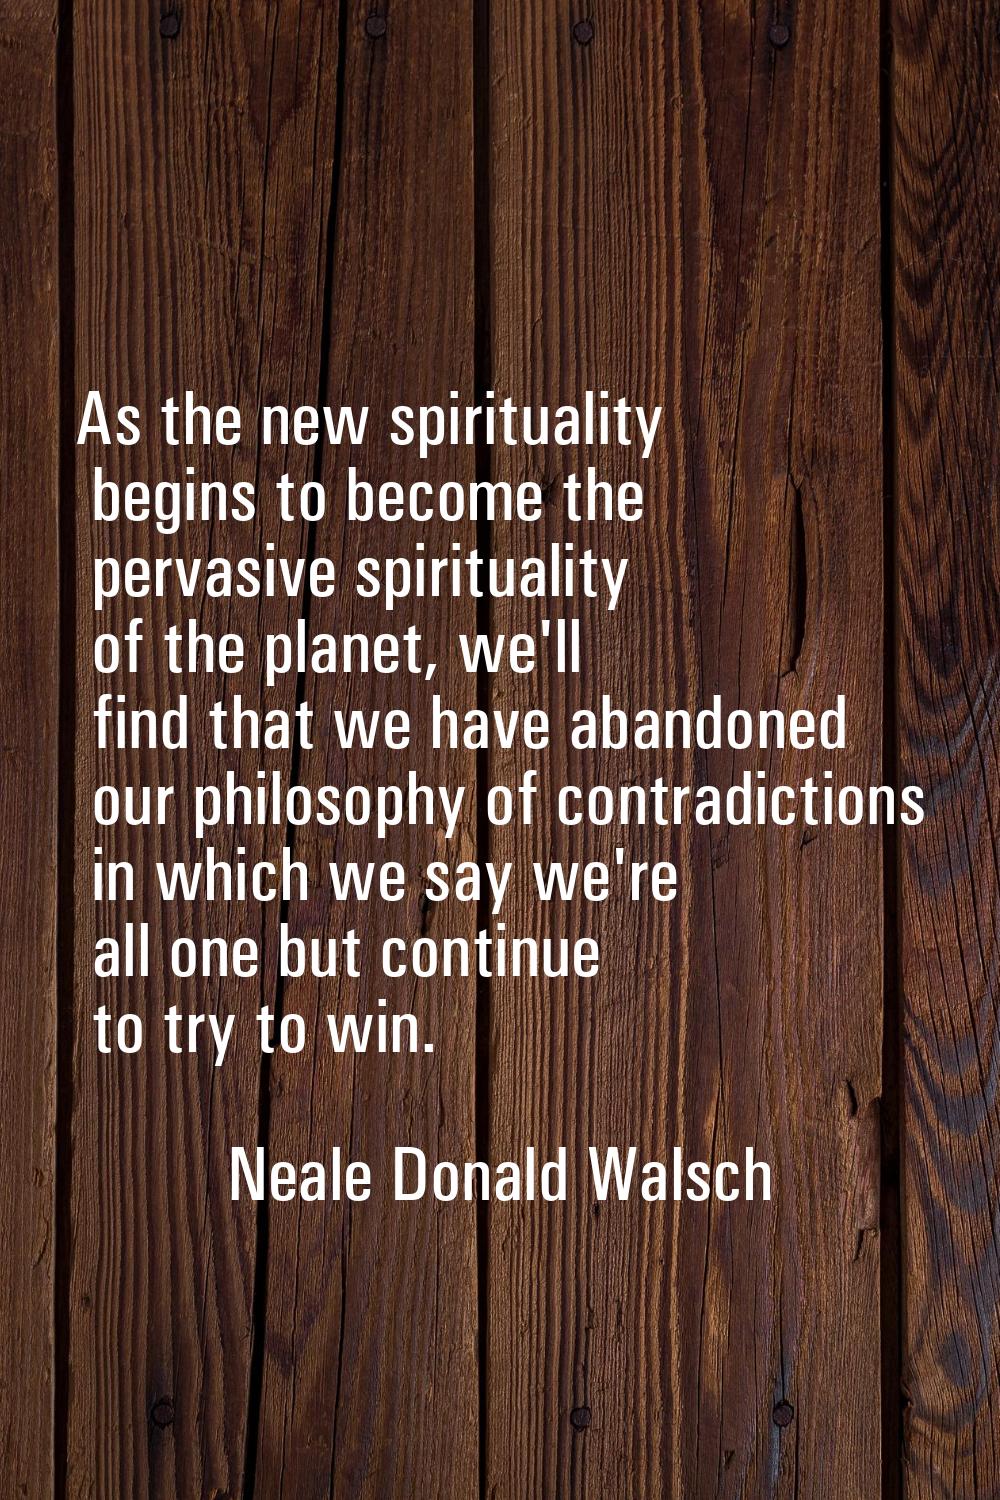 As the new spirituality begins to become the pervasive spirituality of the planet, we'll find that 